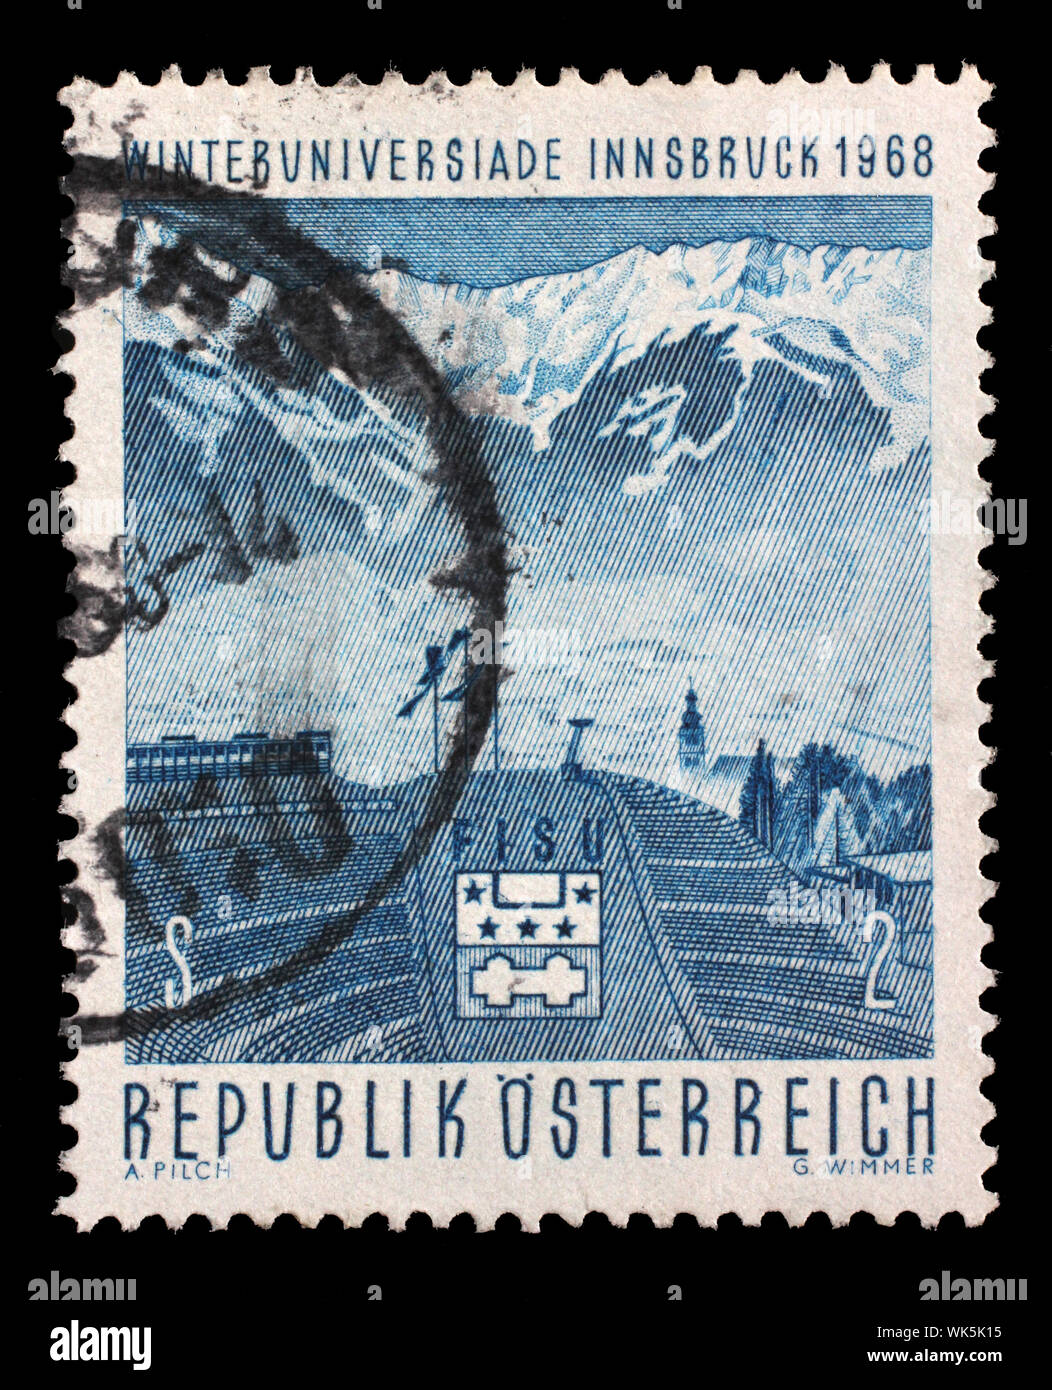 Stamp issued in the Austria shows Berg Isel ski-jump with view on the northern mountain range, University Winter Games in Innsbruck, circa 1968. Stock Photo